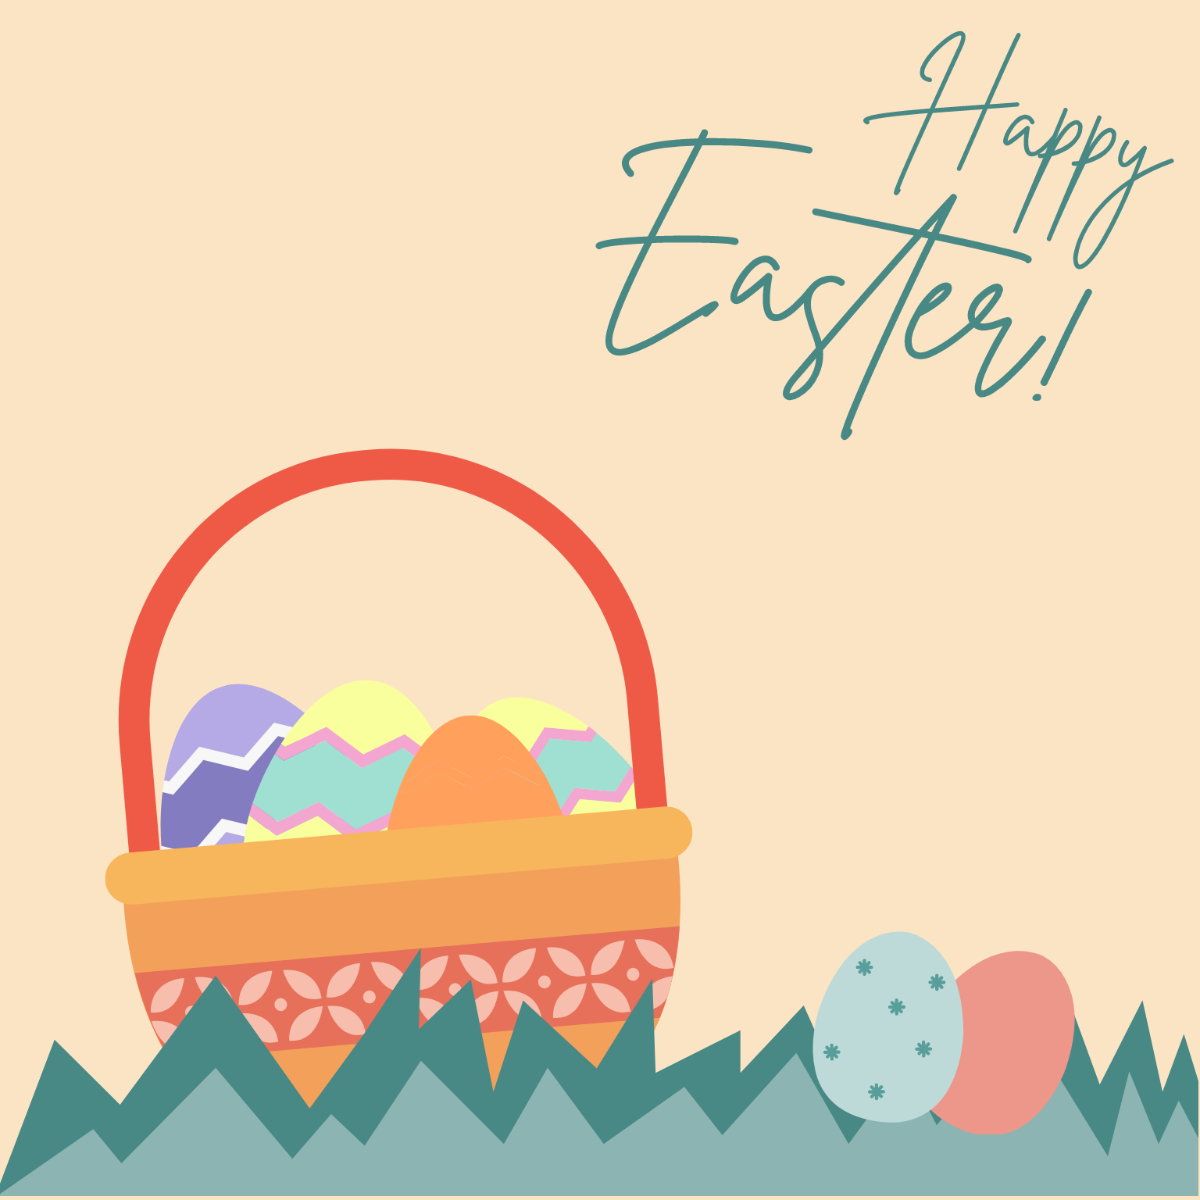 Free Easter Basket Vector Template